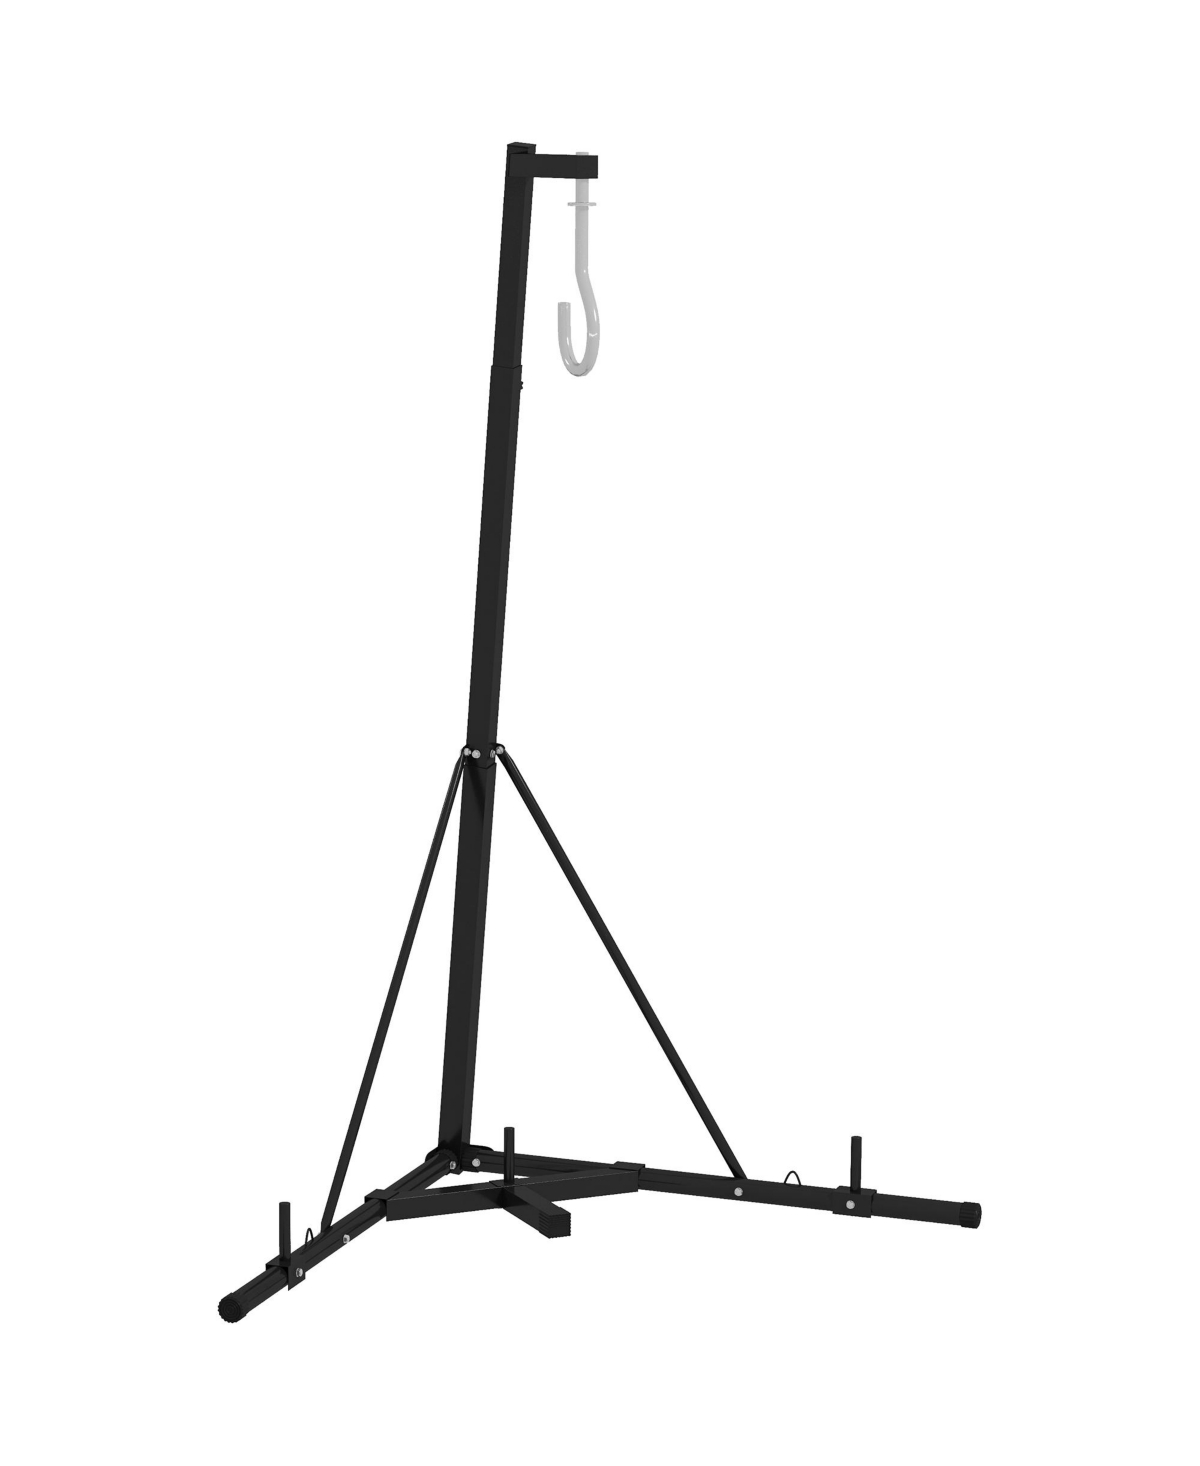 Punch Bag Stand for Heavy Bag, Foldable and Height Adjustable - Black